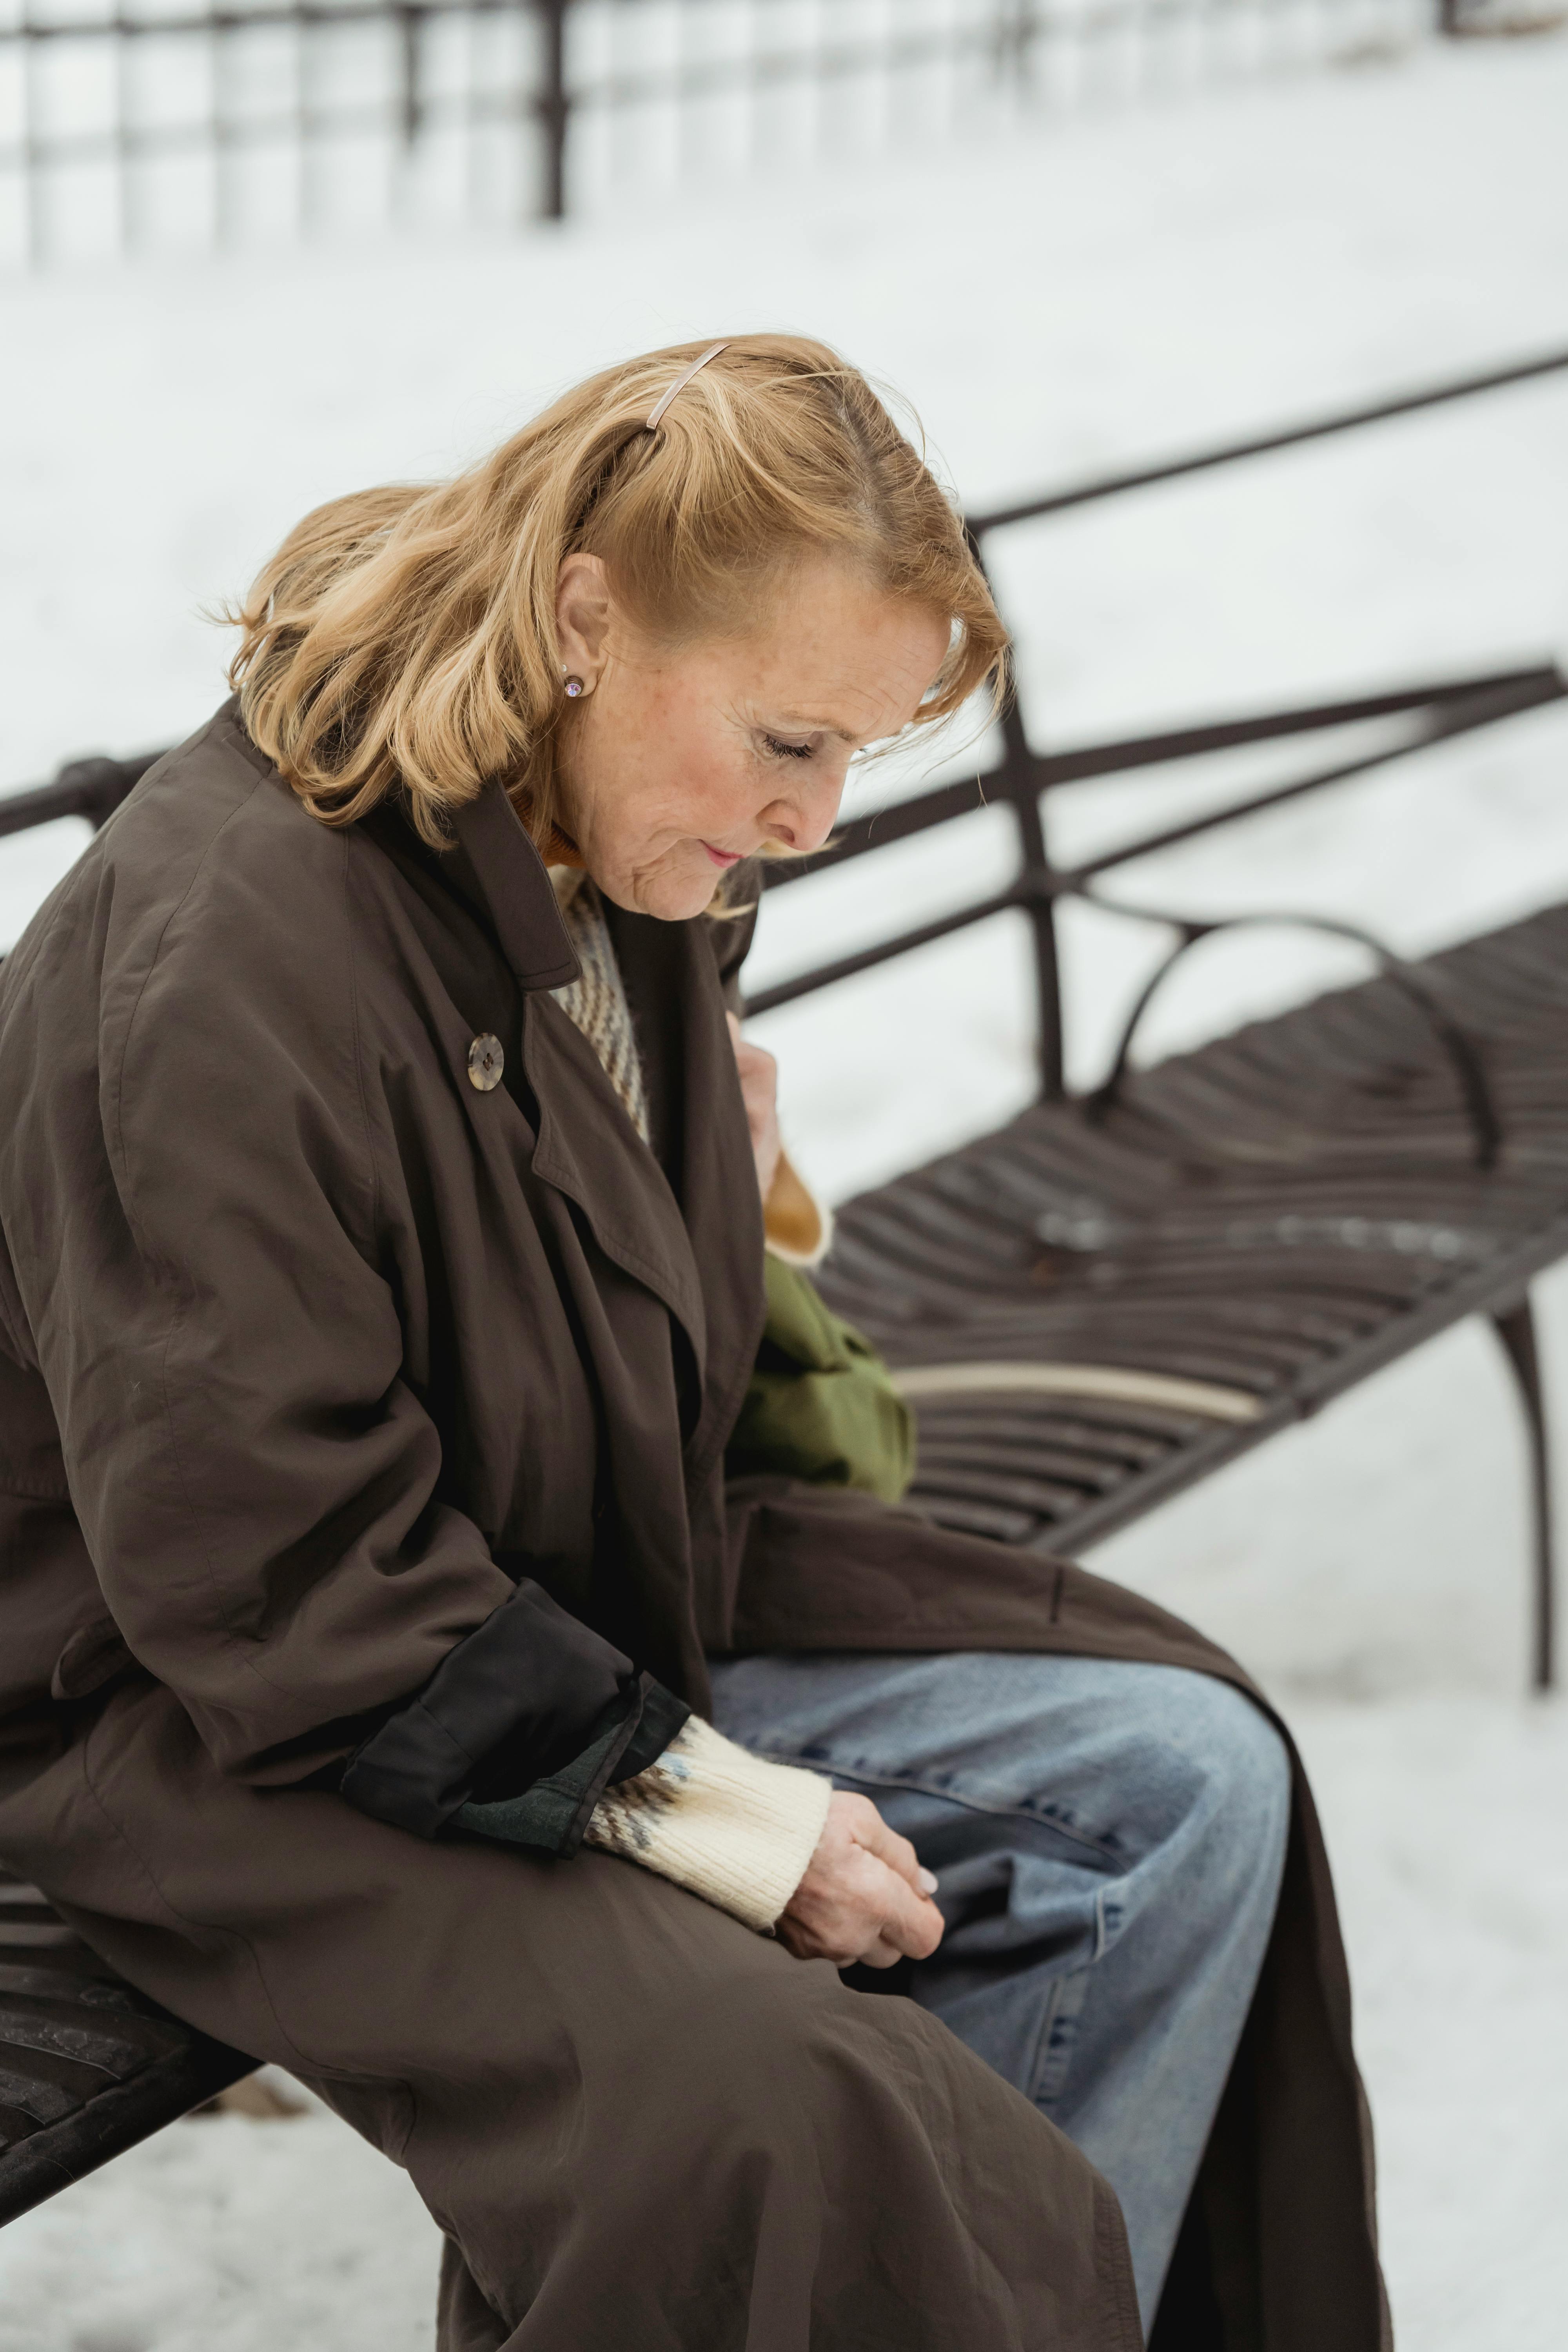 An upset older woman looking down while sitting on a bench | Source: Pexels